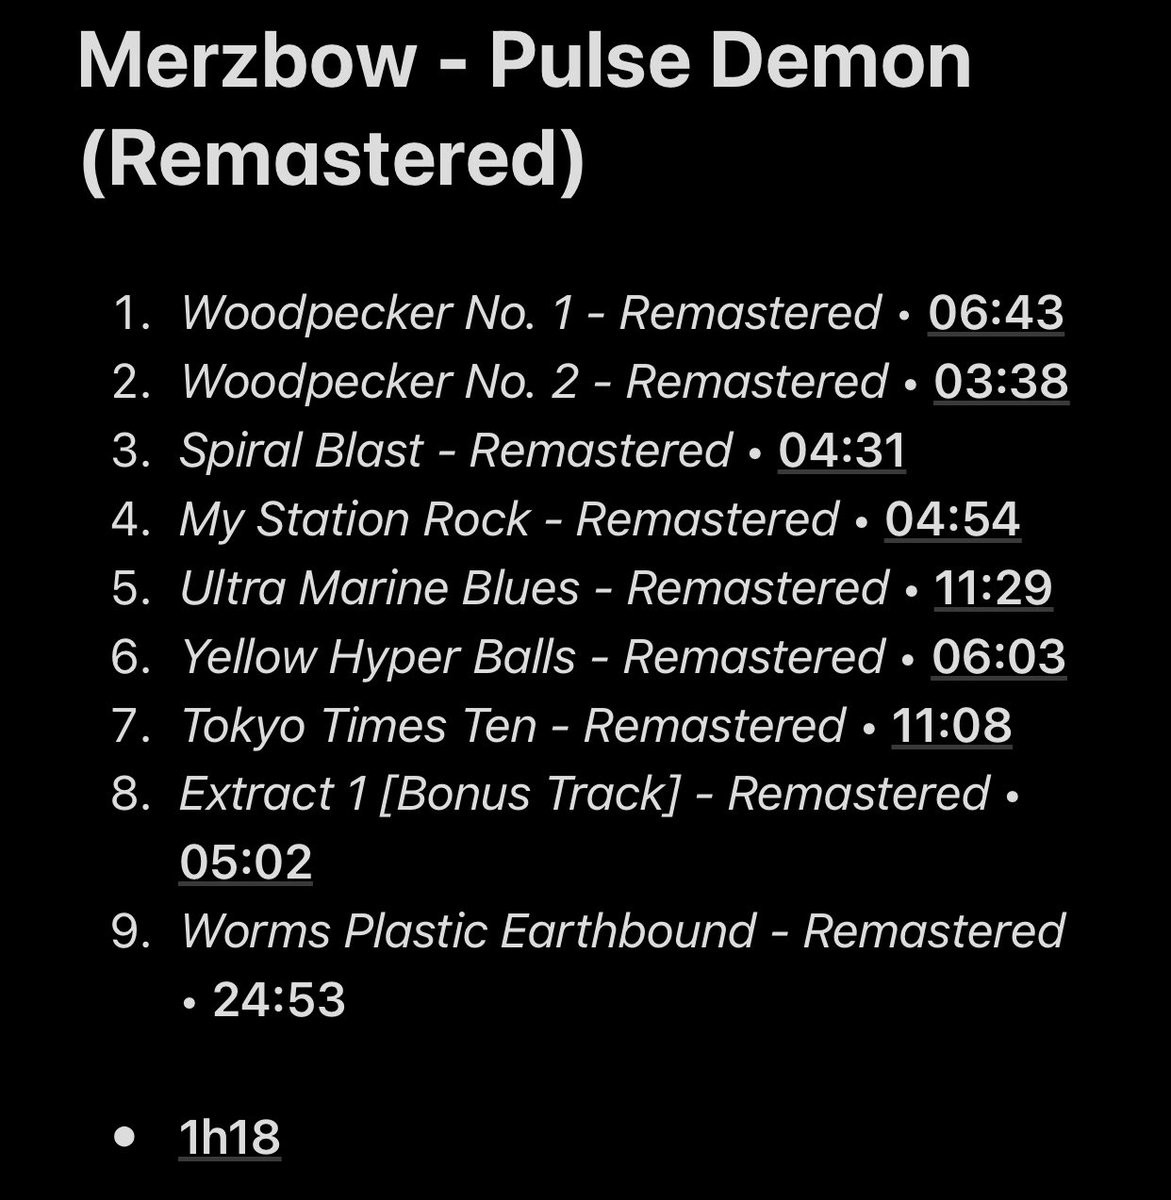 103/109: Pulse Demon (Remastered)What a pleasure to listen to the best piece of music ever created. No but seriously this album bangs, sounds are crazy and this remastered version is definitely better than the original. Do I need help?